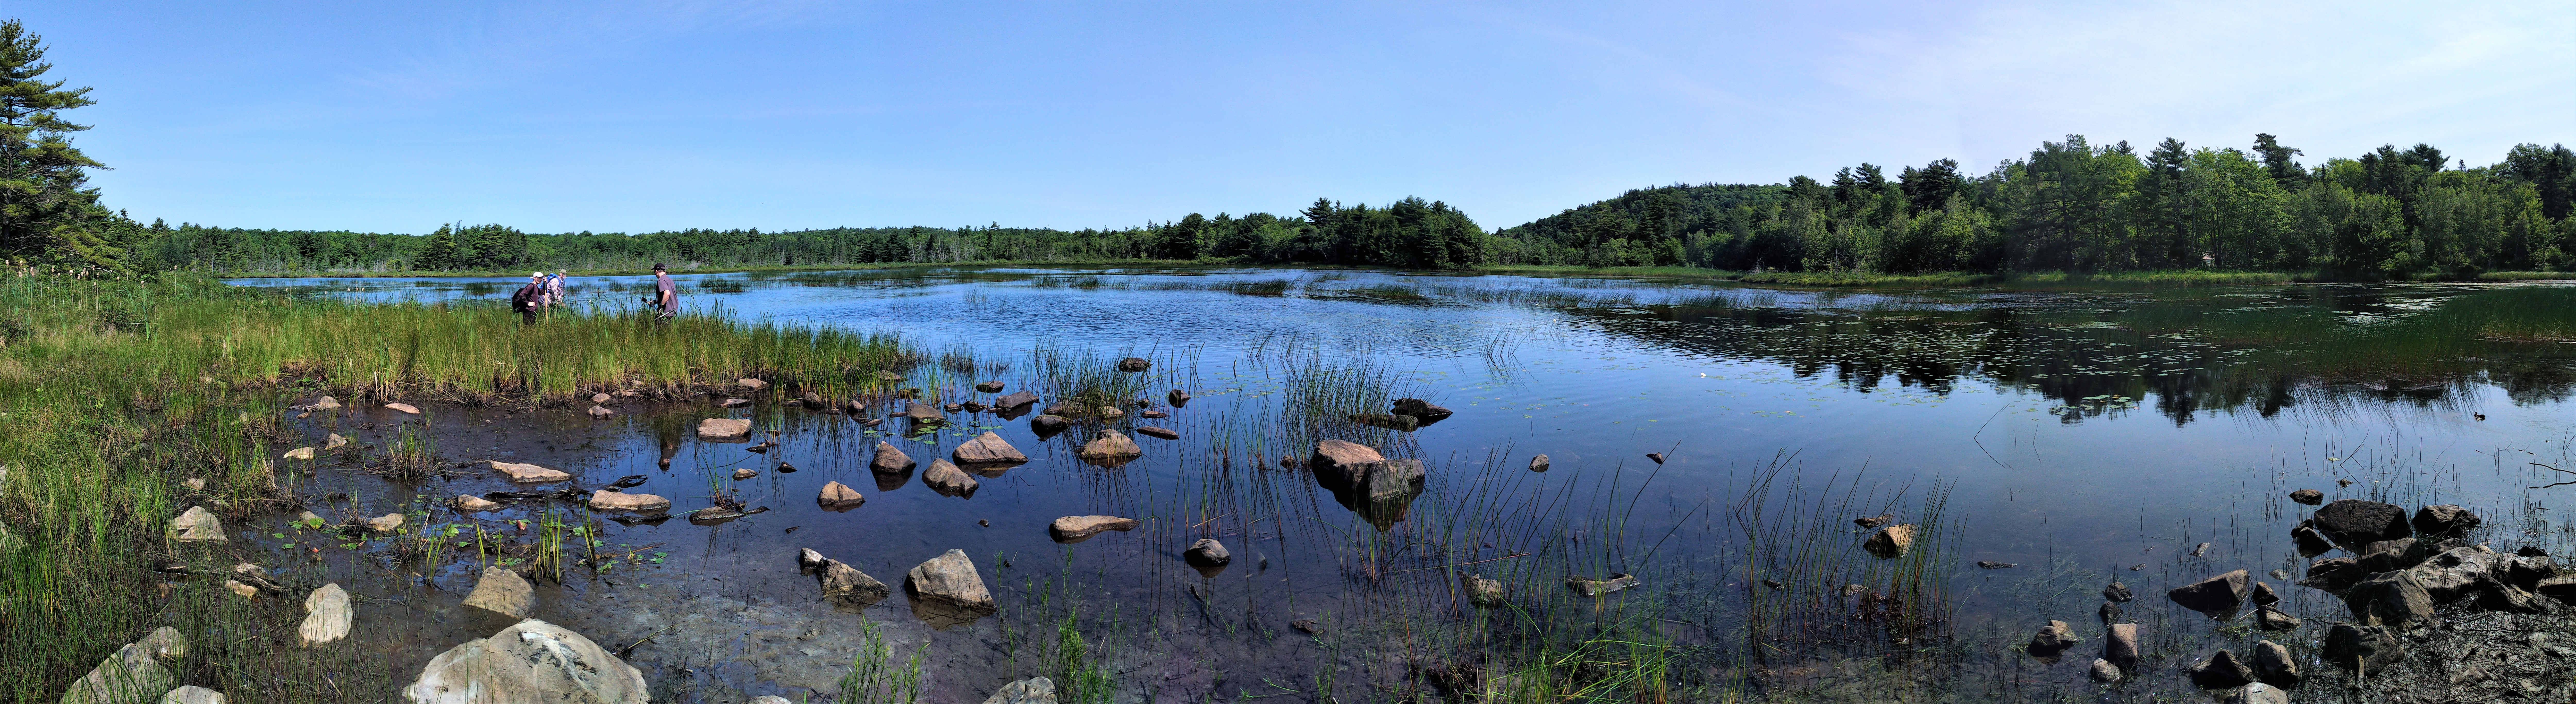 Panorama of Muddy Pond with tailings at bottom and 3 people working at a distance along the shore